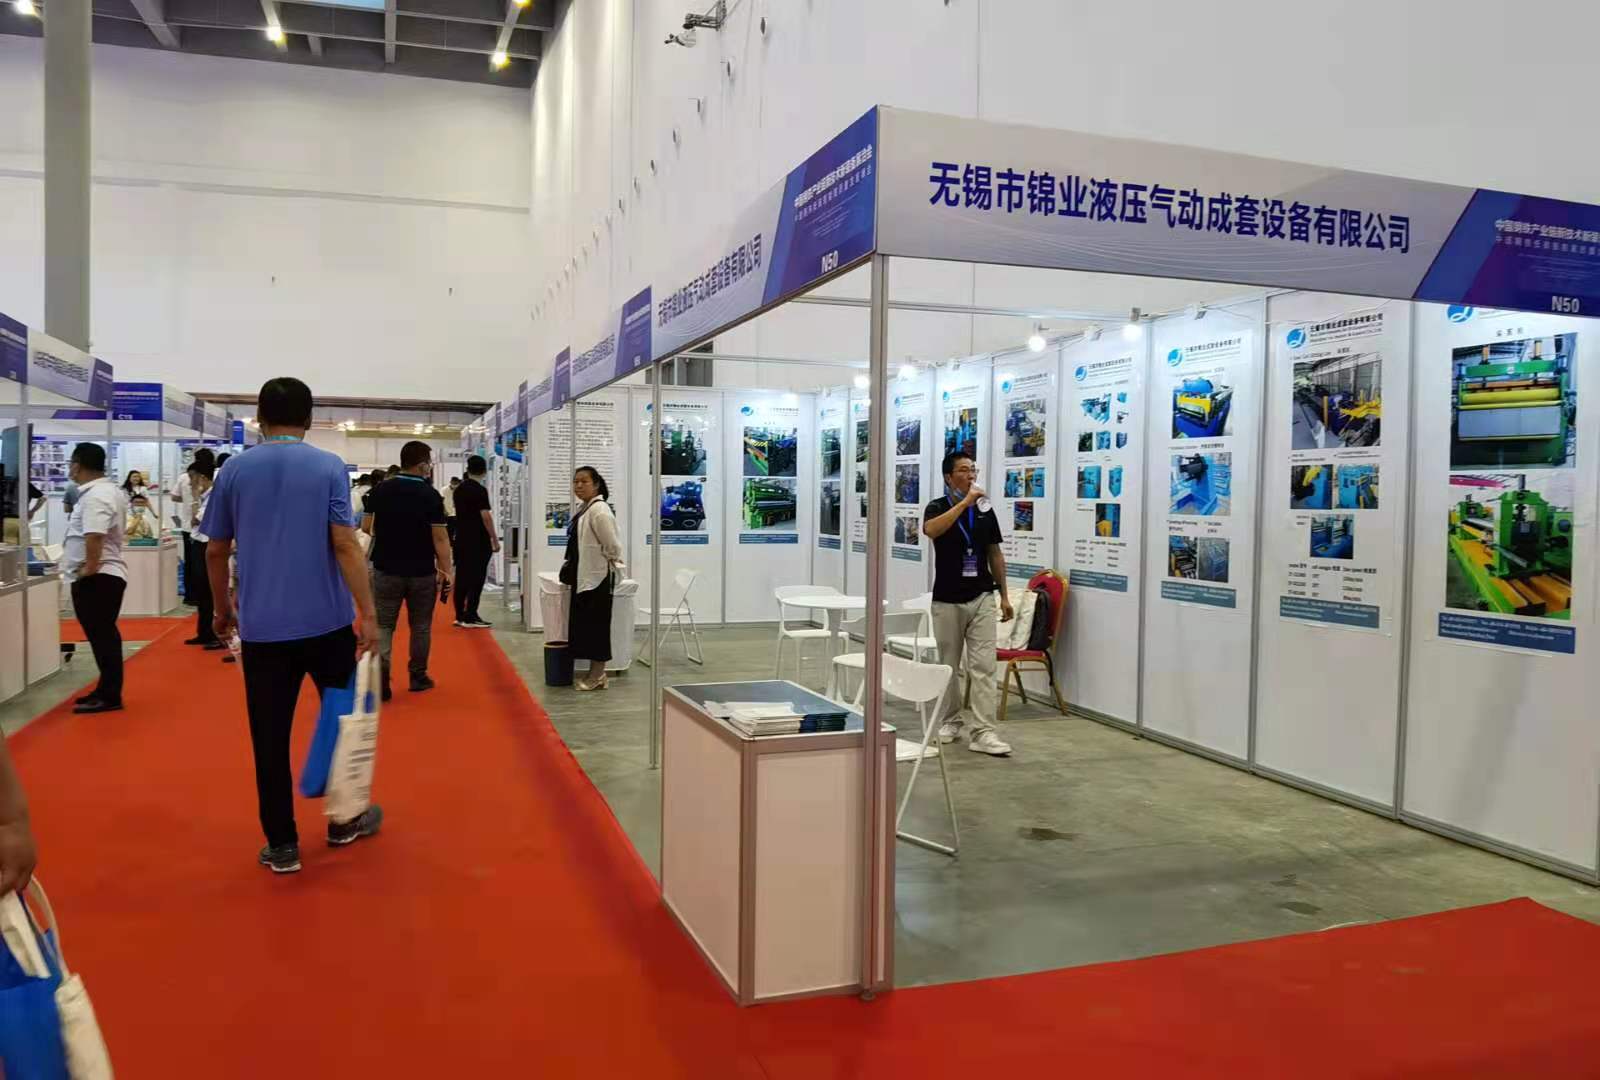 China Steel Industry Chain New Technology Fair, Low carbon, Intelligent, high quality Developing